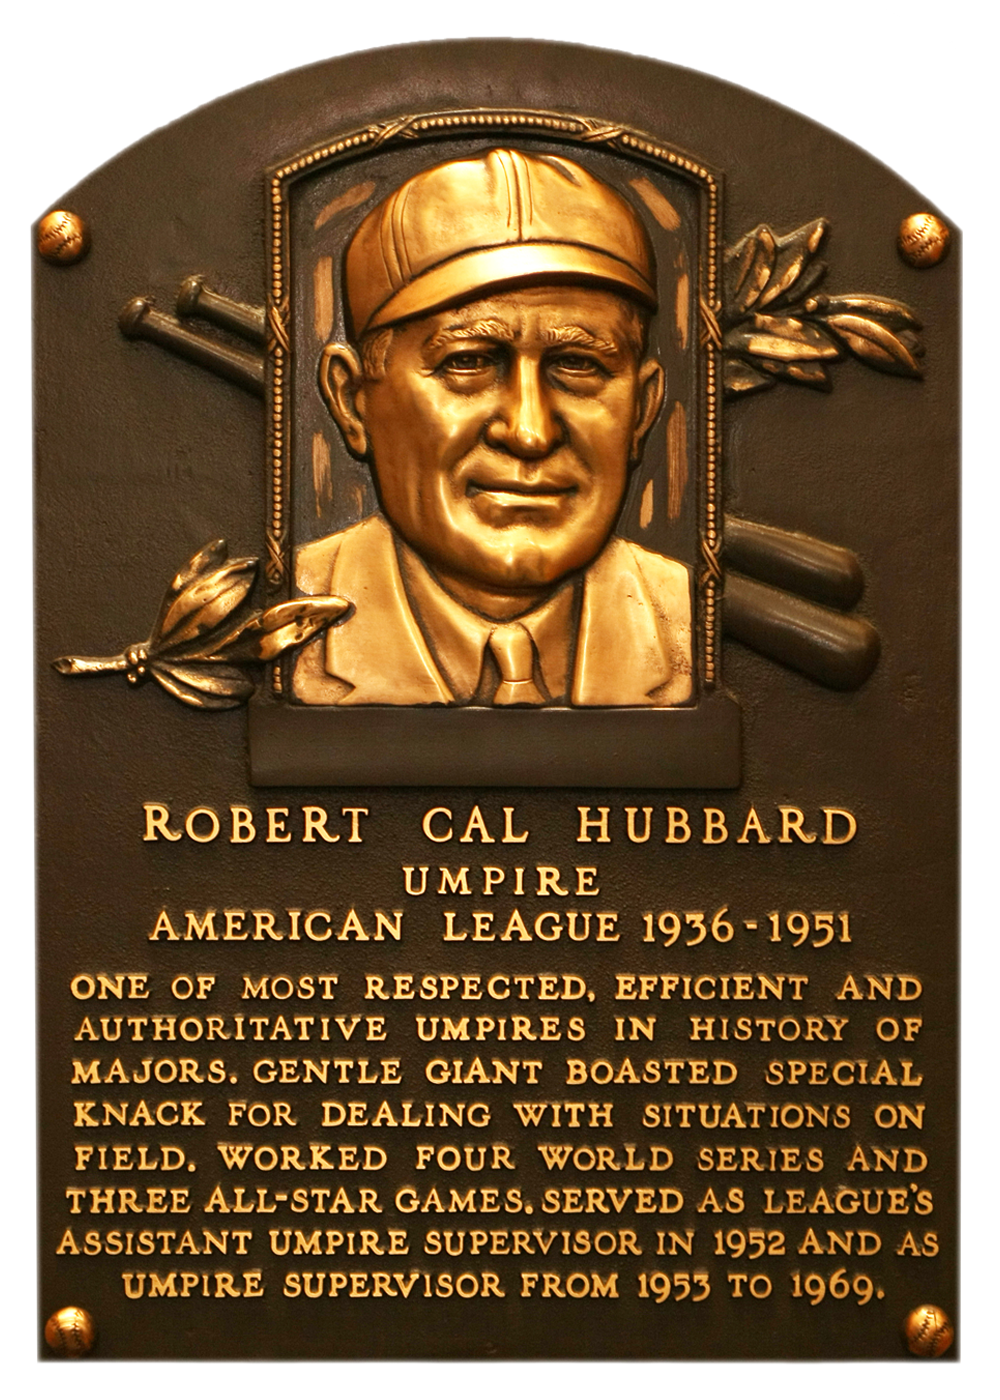 Cal Hubbard Hall of Fame plaque